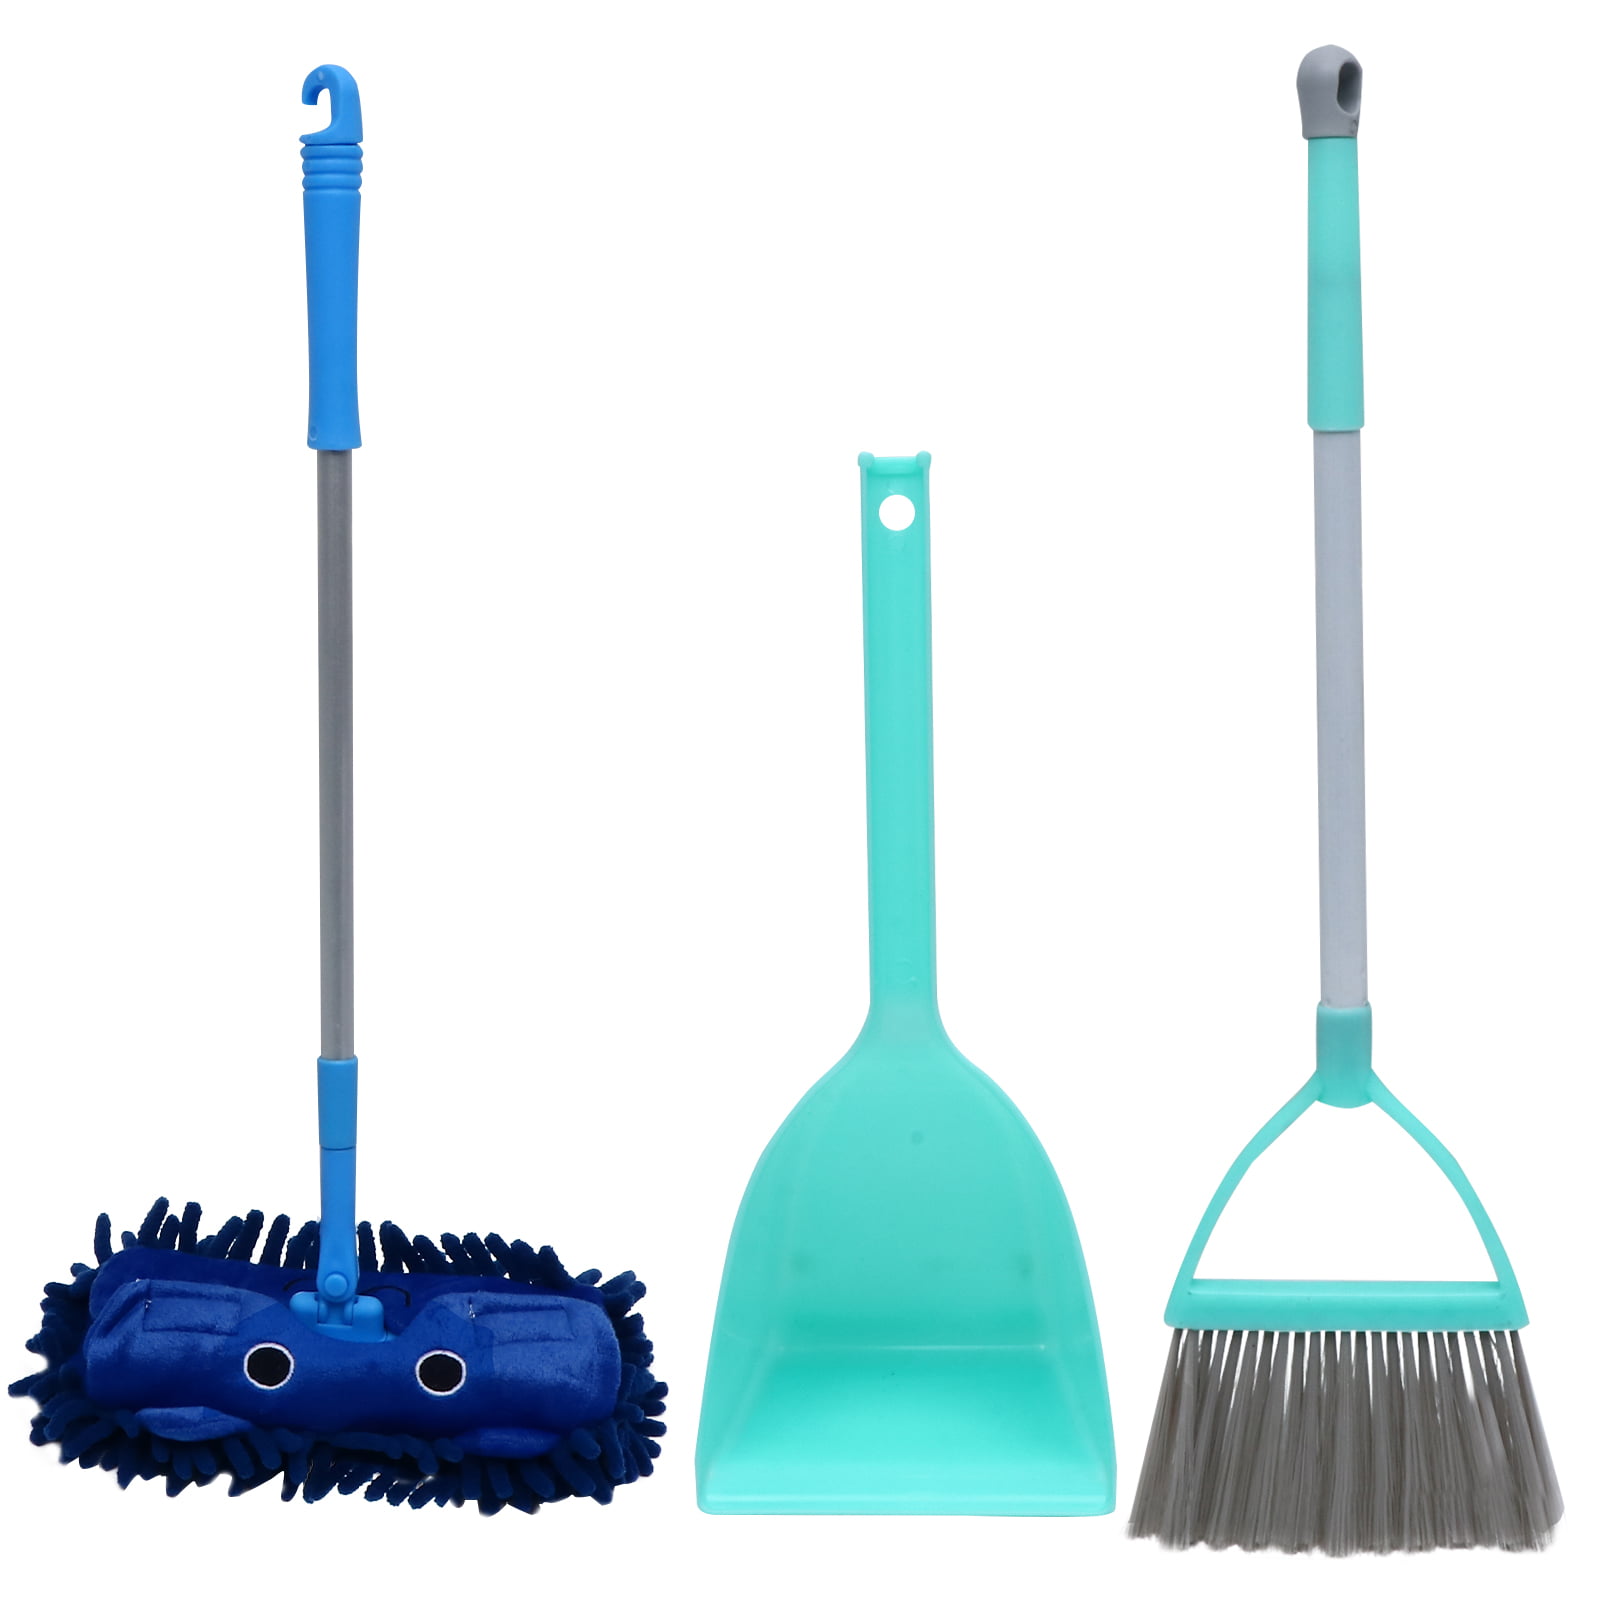 Lianle Home Childrens Cleaning Set Include Small Broom Mop Brush Dustpan，Mini Cute Housekeeping Cleaning Tools Set Pretend Toy